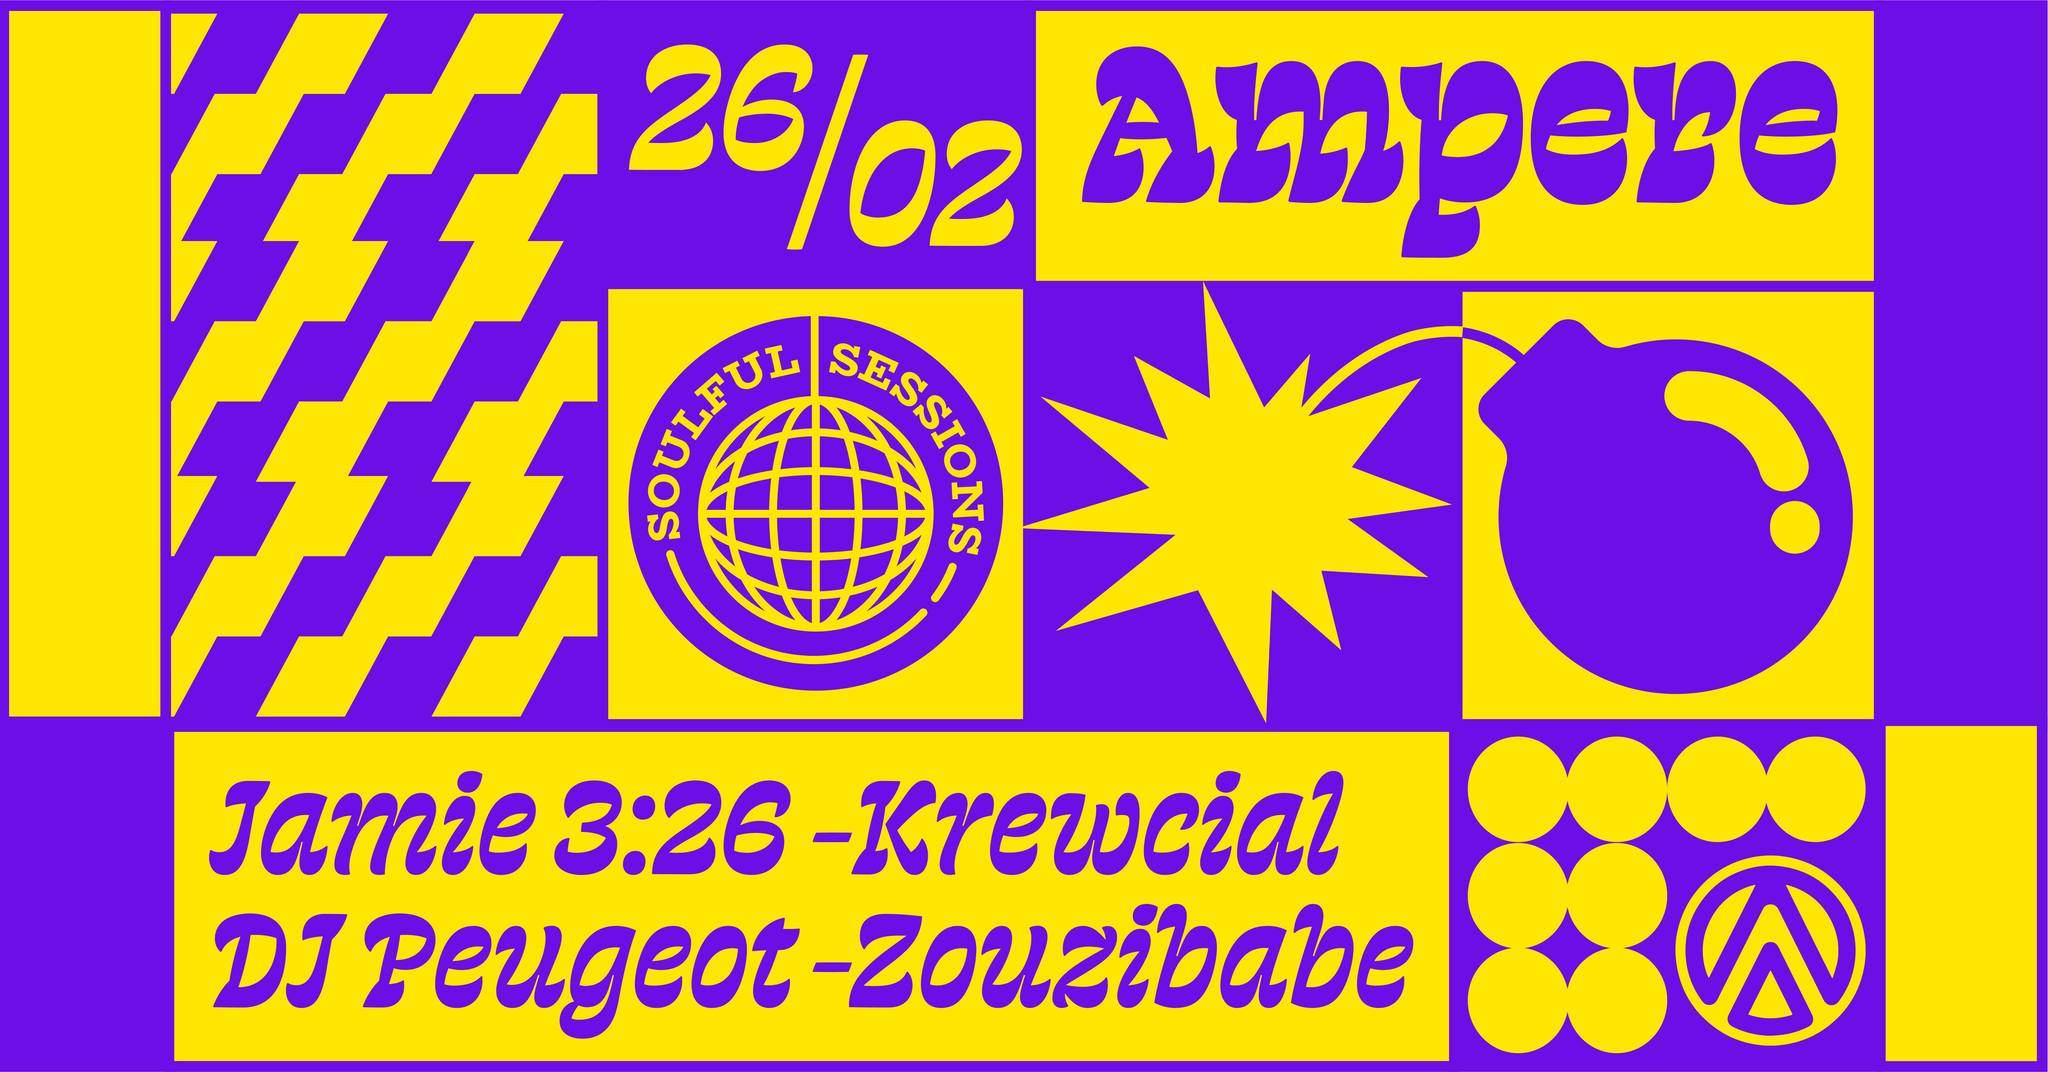 Soulful Sessions with Jamie 3:26 & krewcial - フライヤー表